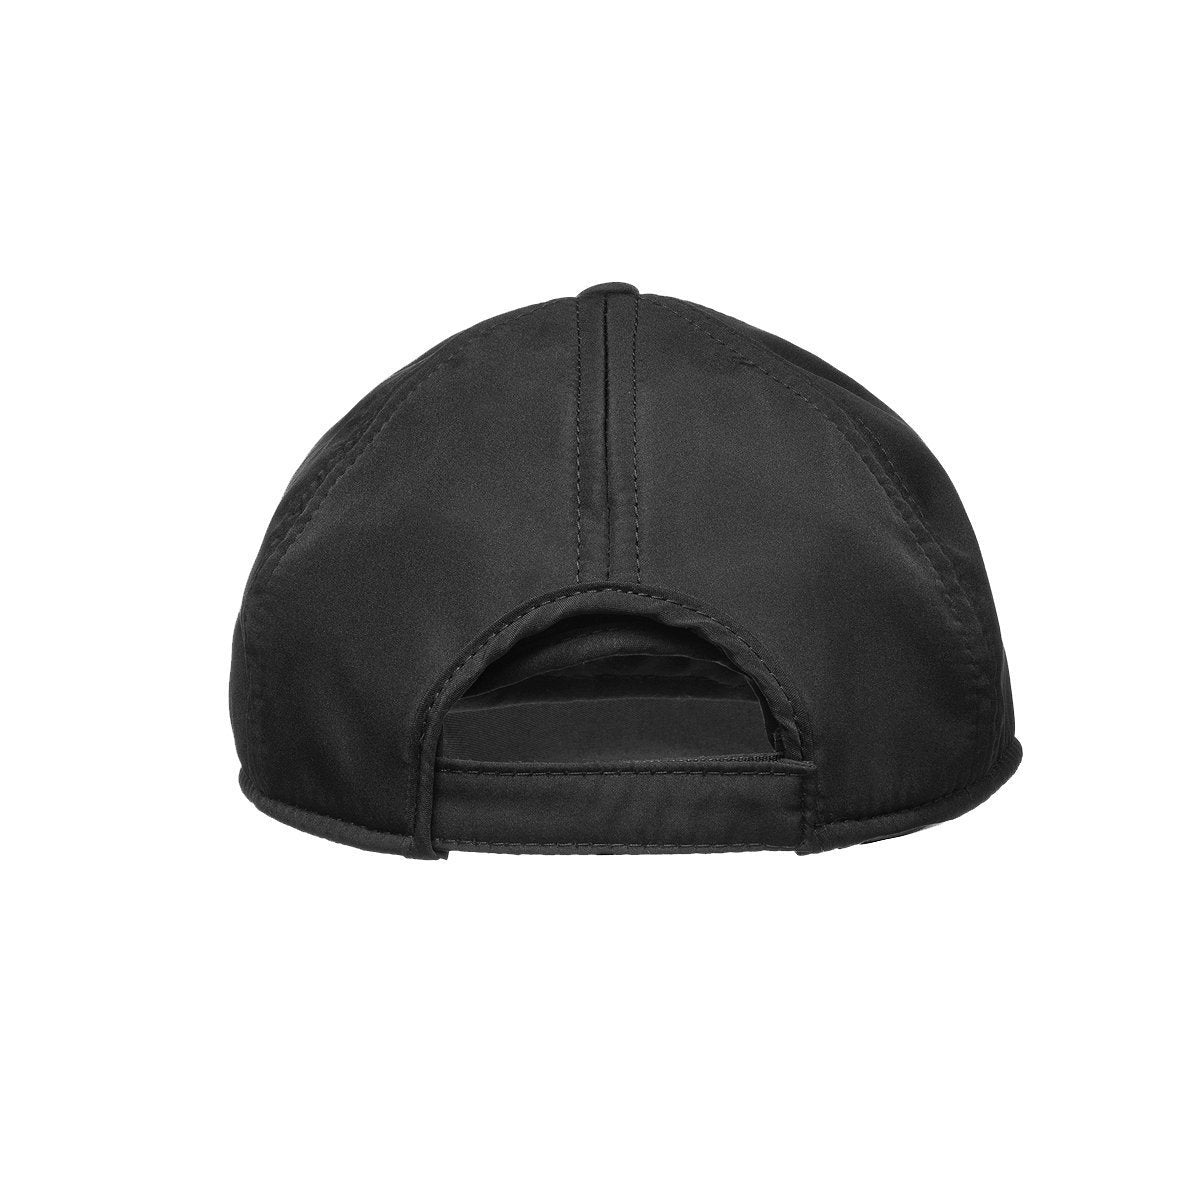 Alfa Winter Baseball Cap Earflaps Trapper for Cold Weather